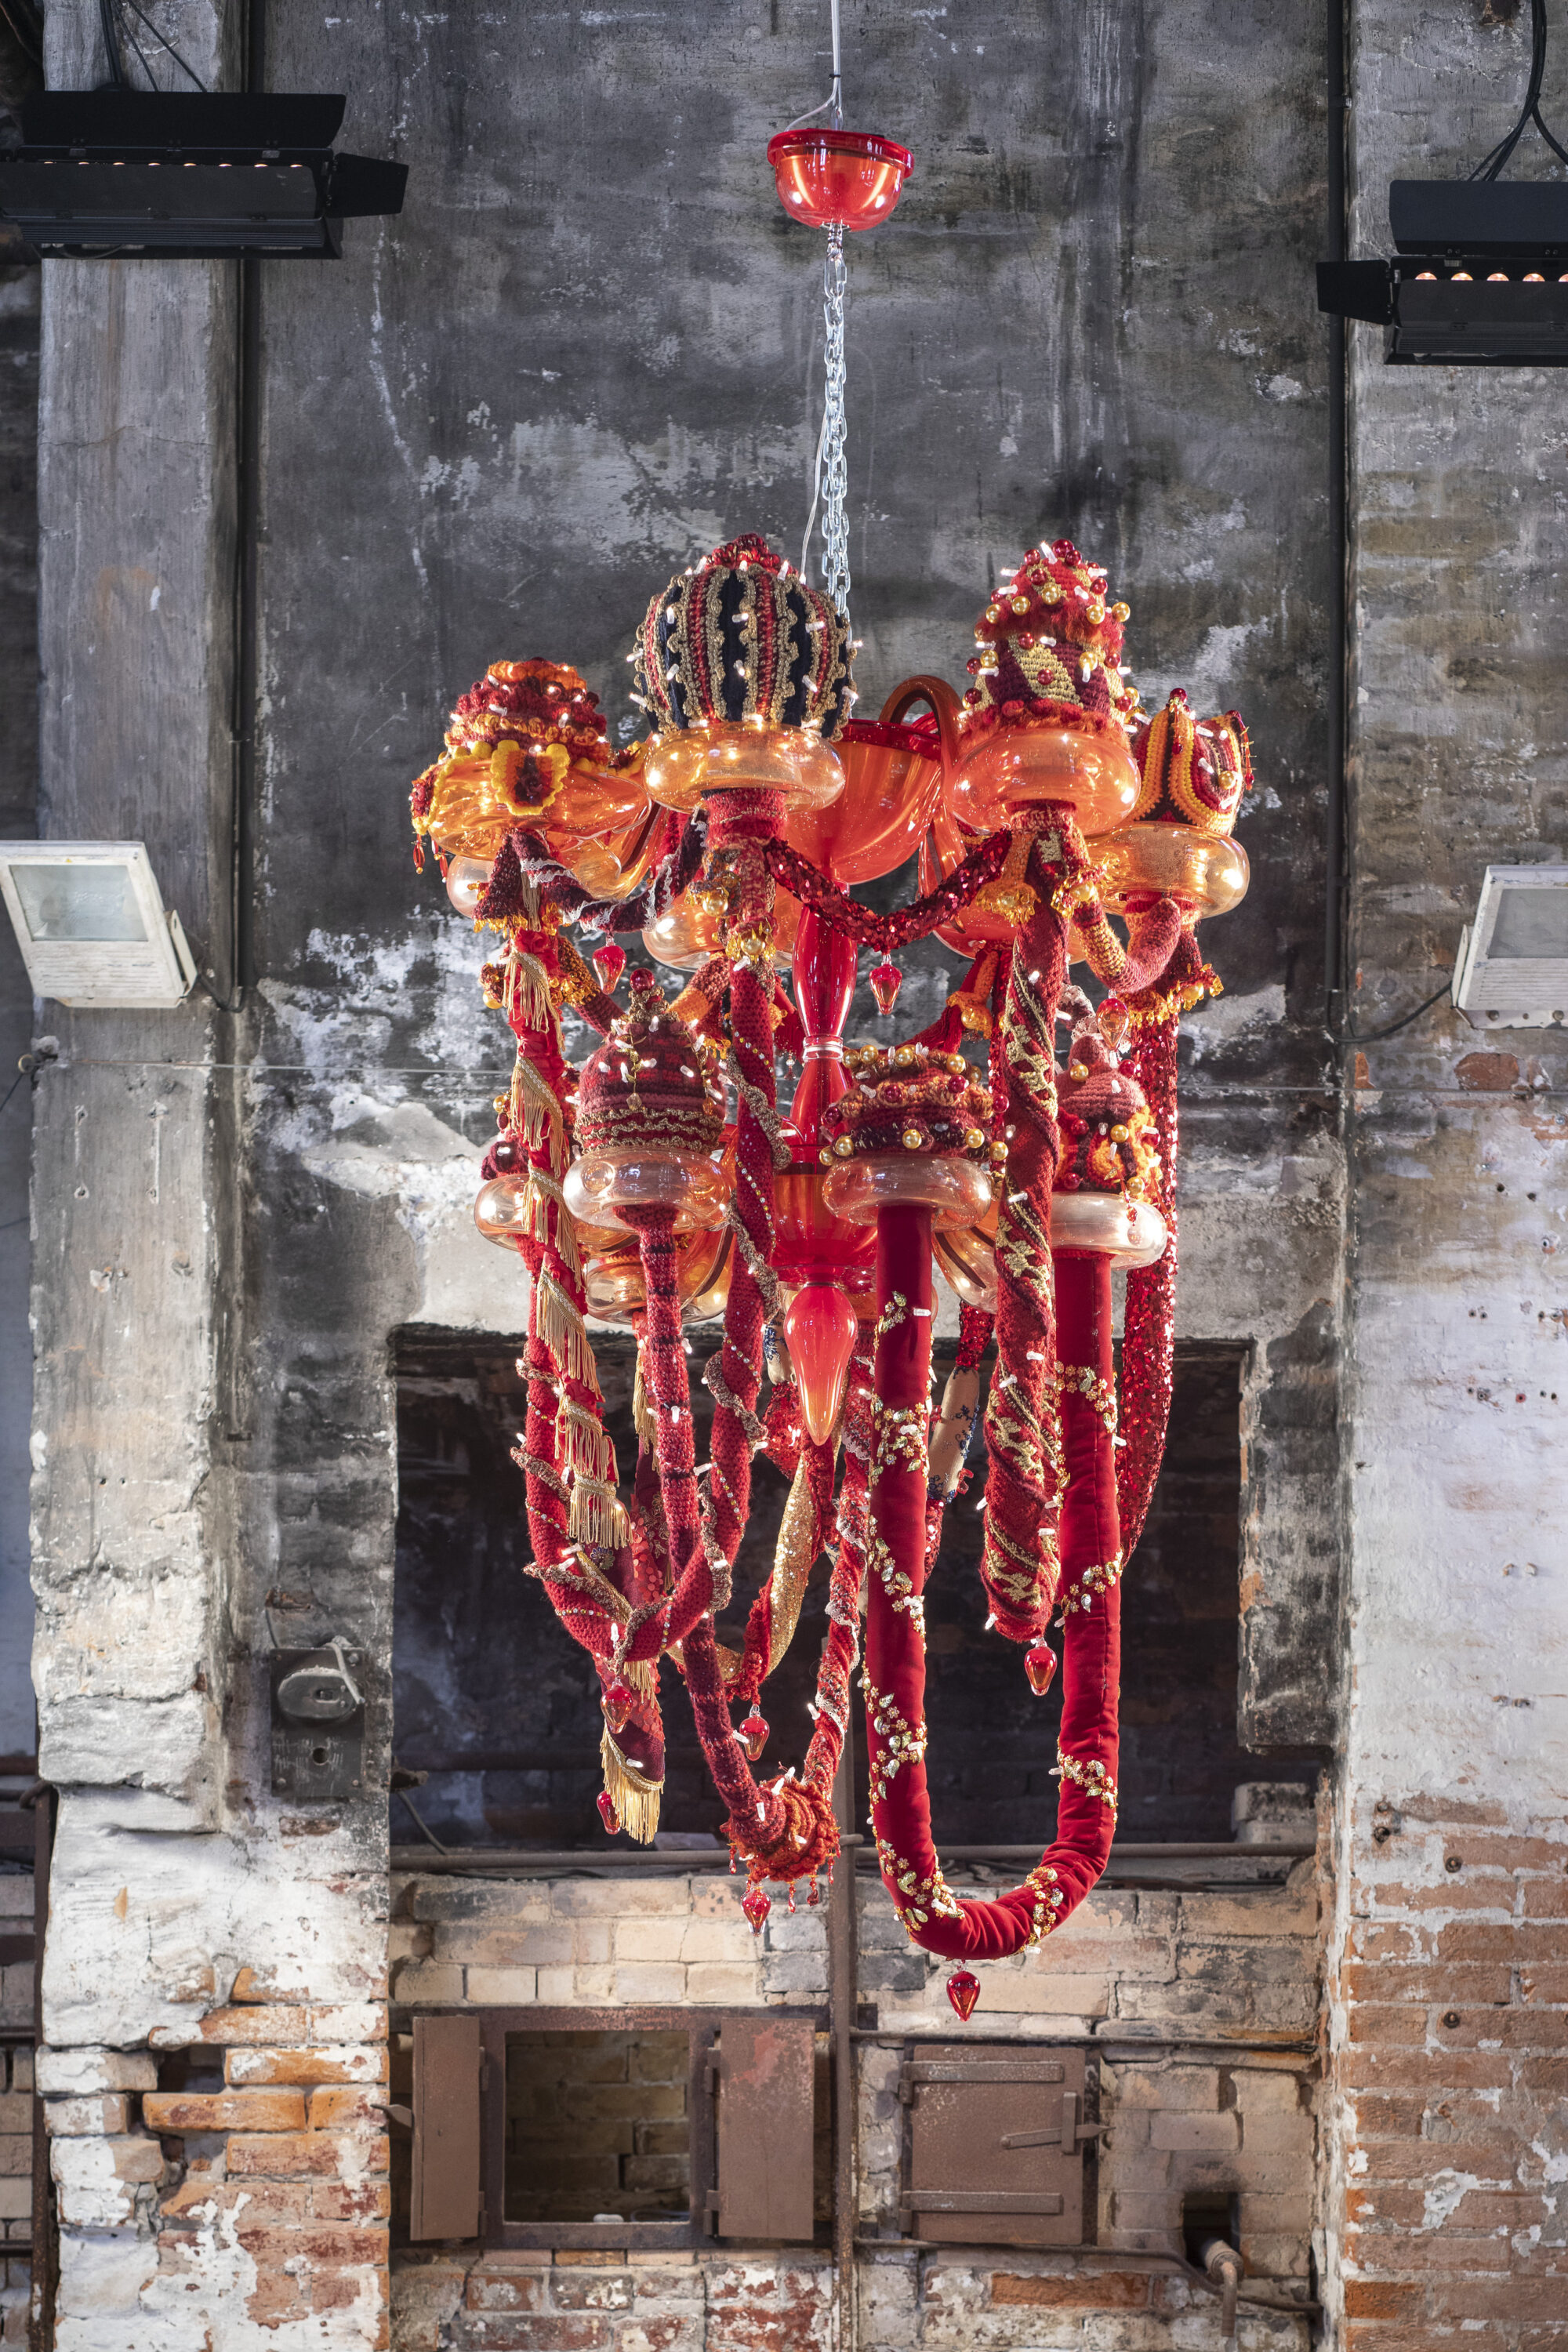 A large chandelier hangs from a chain in a brick room. The chandelier is made of red, orange, and yellow Murano glass, wool yarn, polyester fabrics, and LED lighting, with large red and gold elongated fabric garlands dangling at various heights, topped by embroidered crowns.